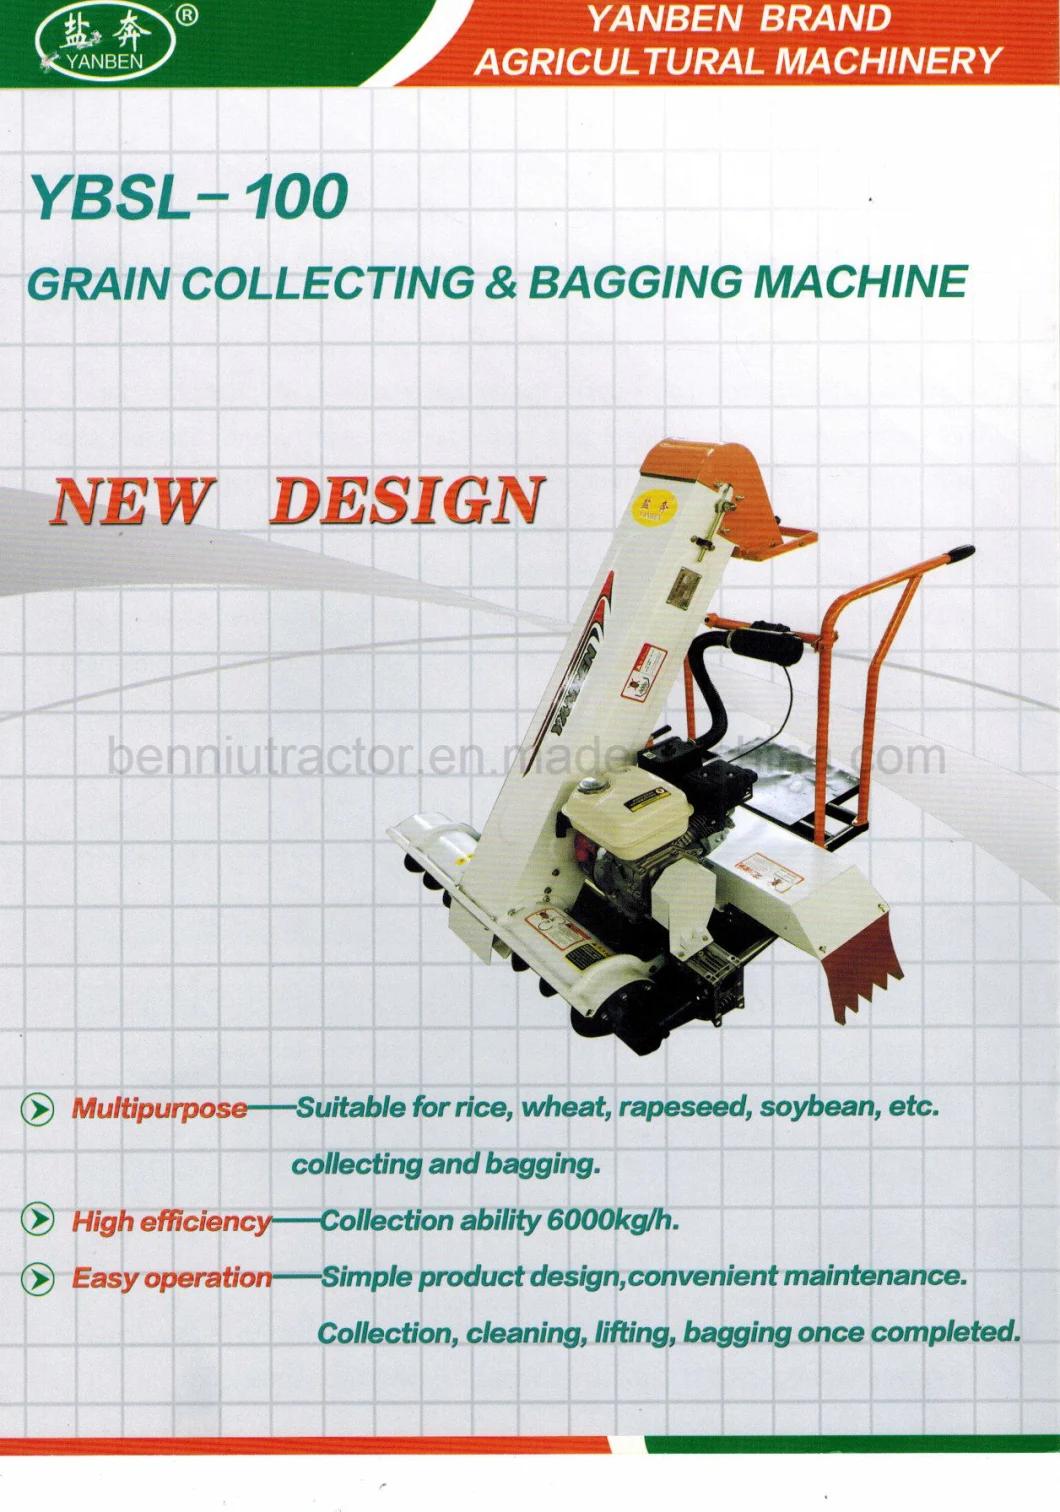 Ybsl-100 Grain Filling and Bagging Machine